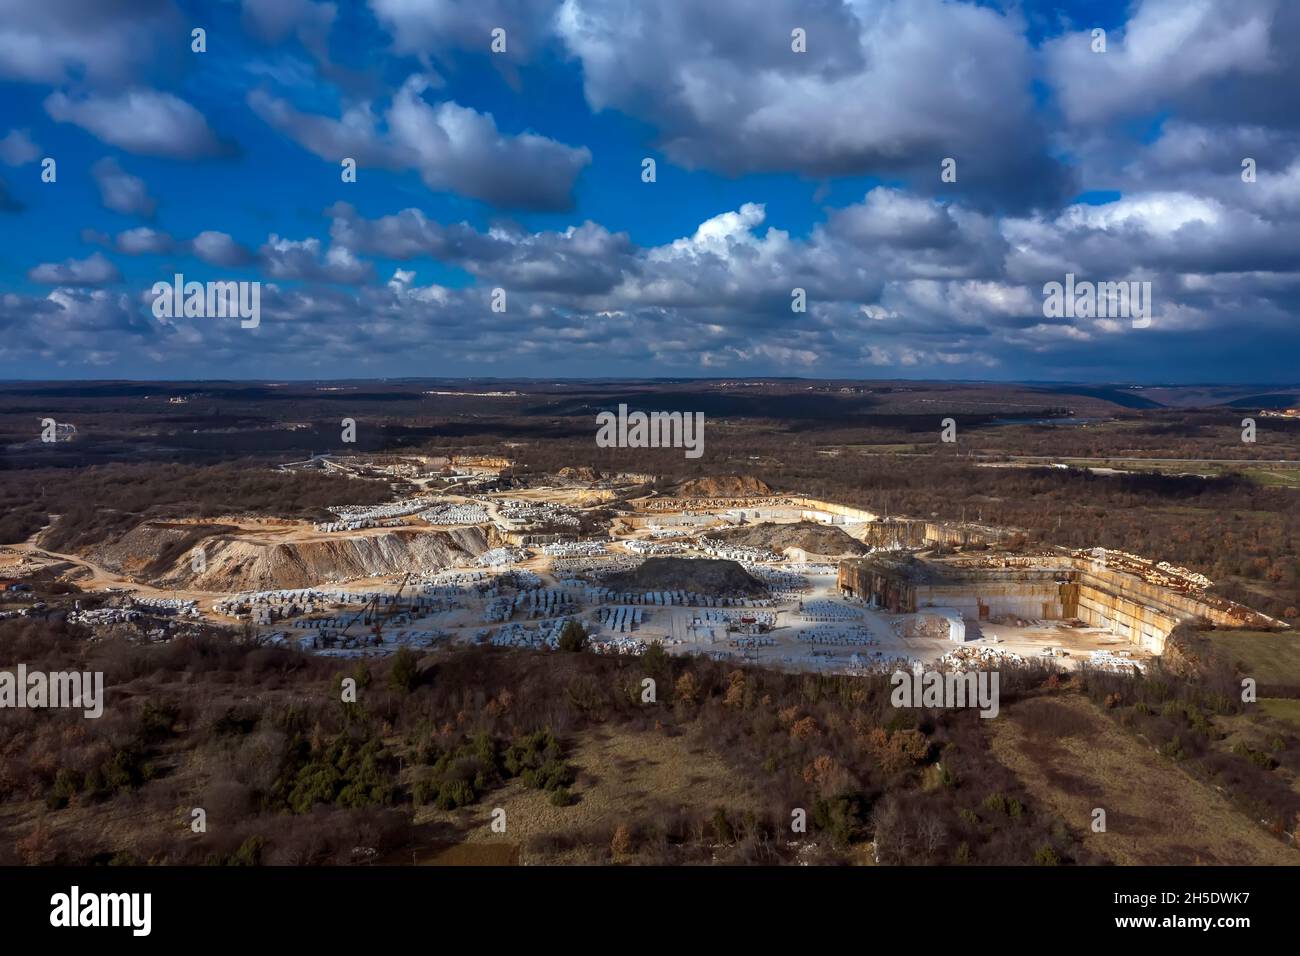 an aerial view of quarry and surroundings at dusk Stock Photo